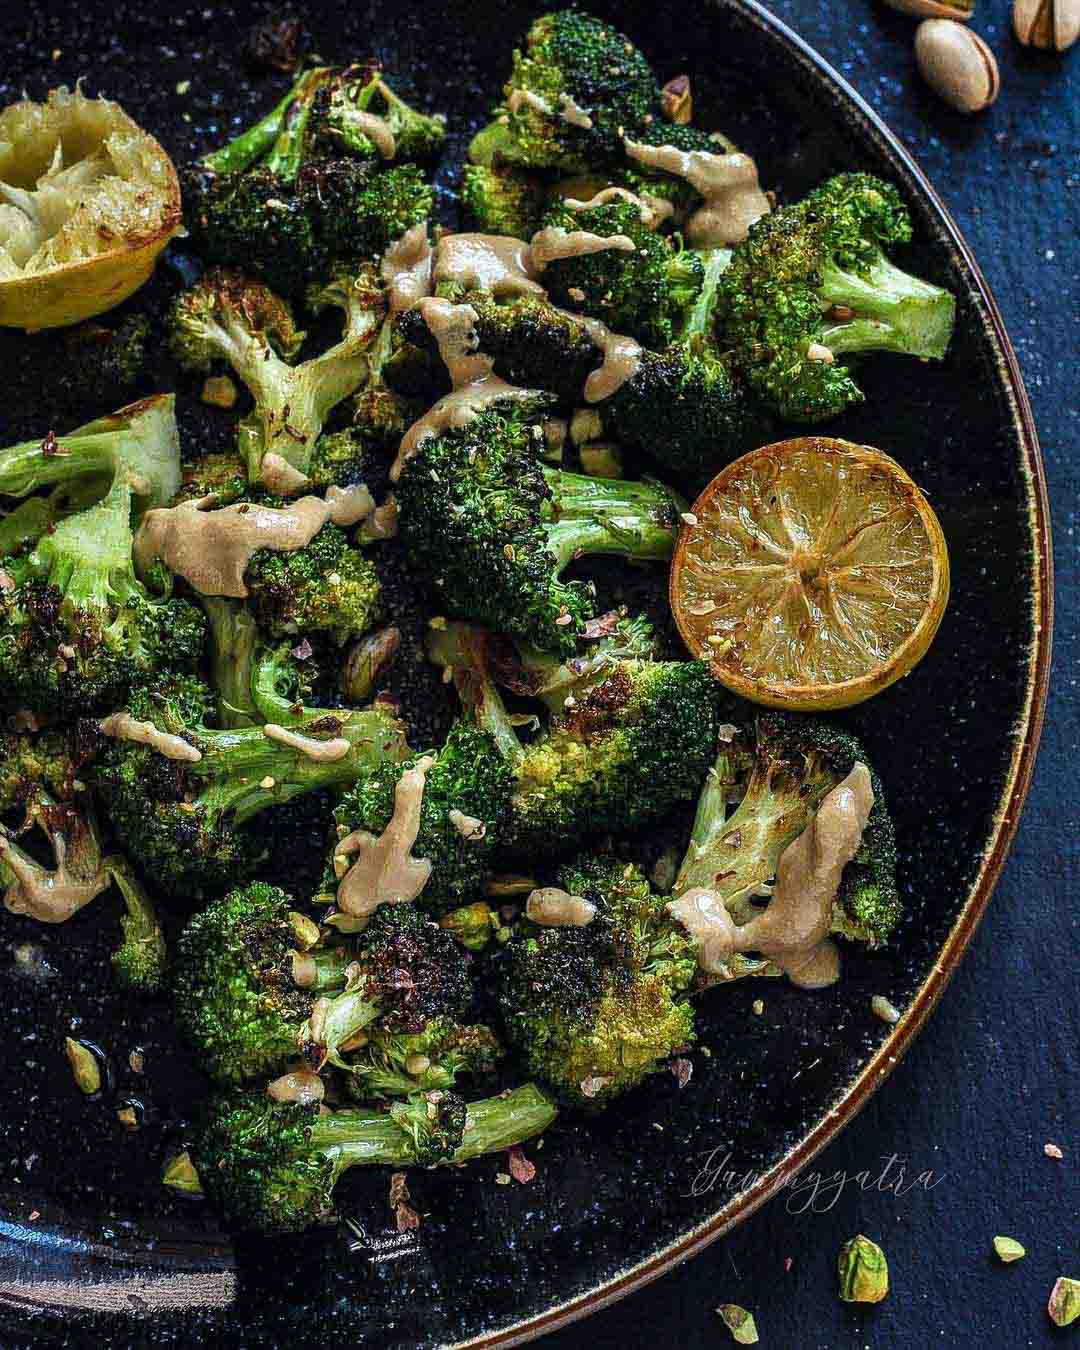 Oven-Roasted Broccoli with Pistachio Dukkah recipe served in a large bowl.